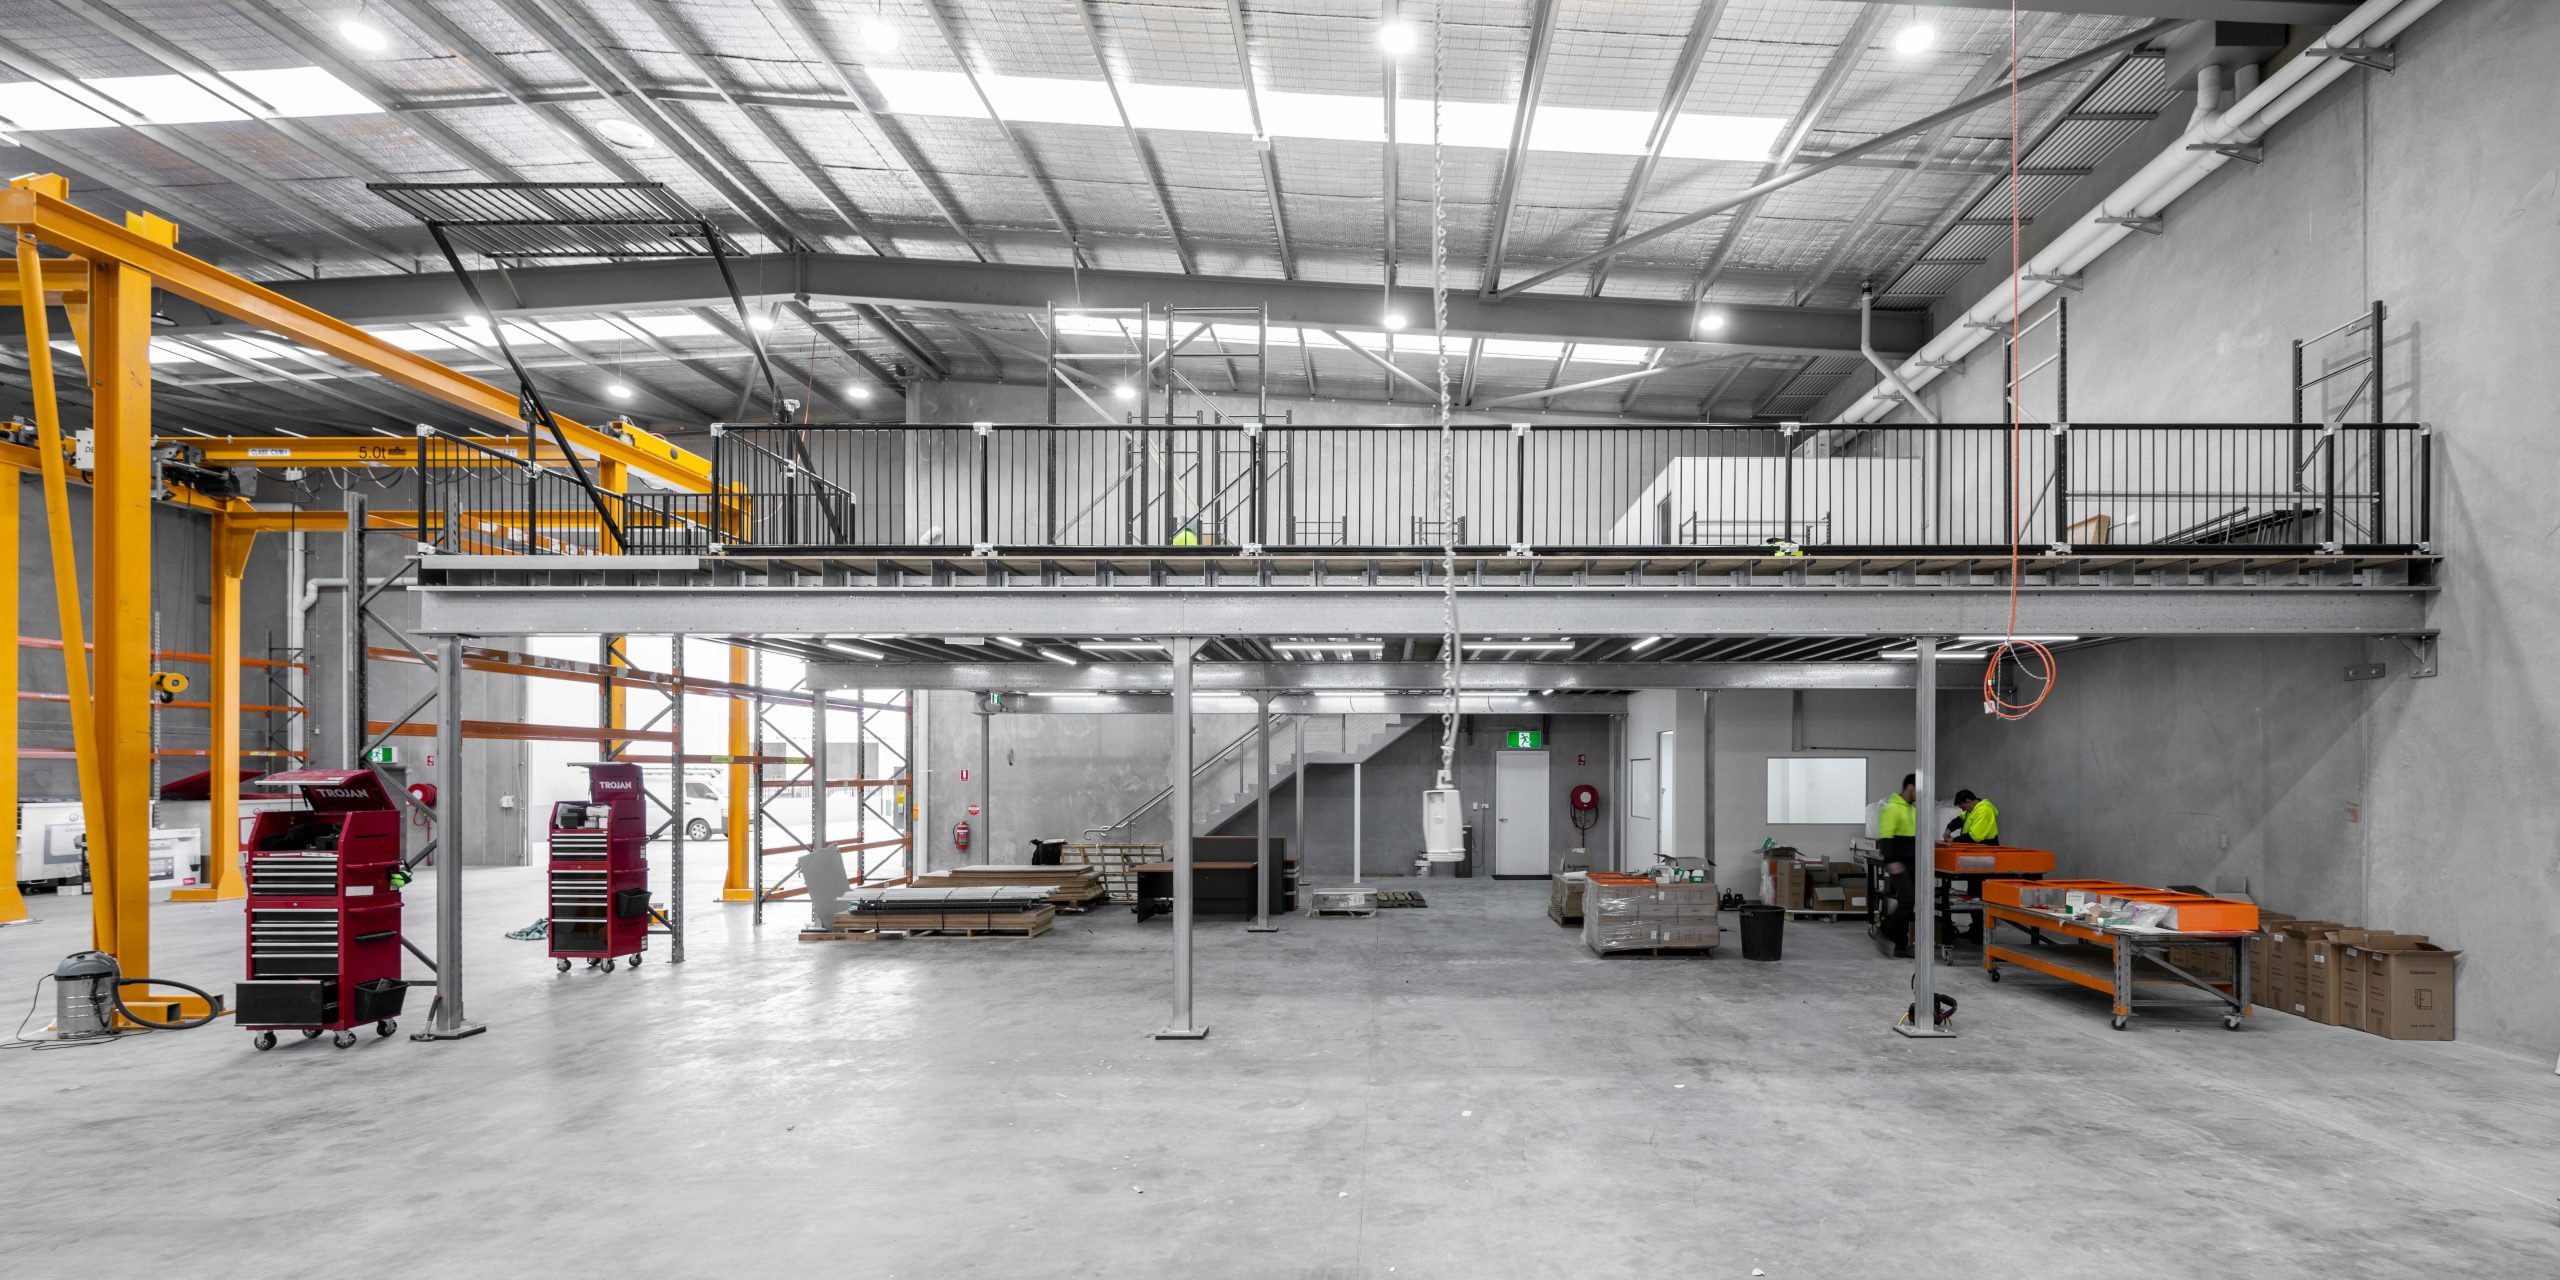 What to Look for When Consulting with a Mezzanine Floor Expert